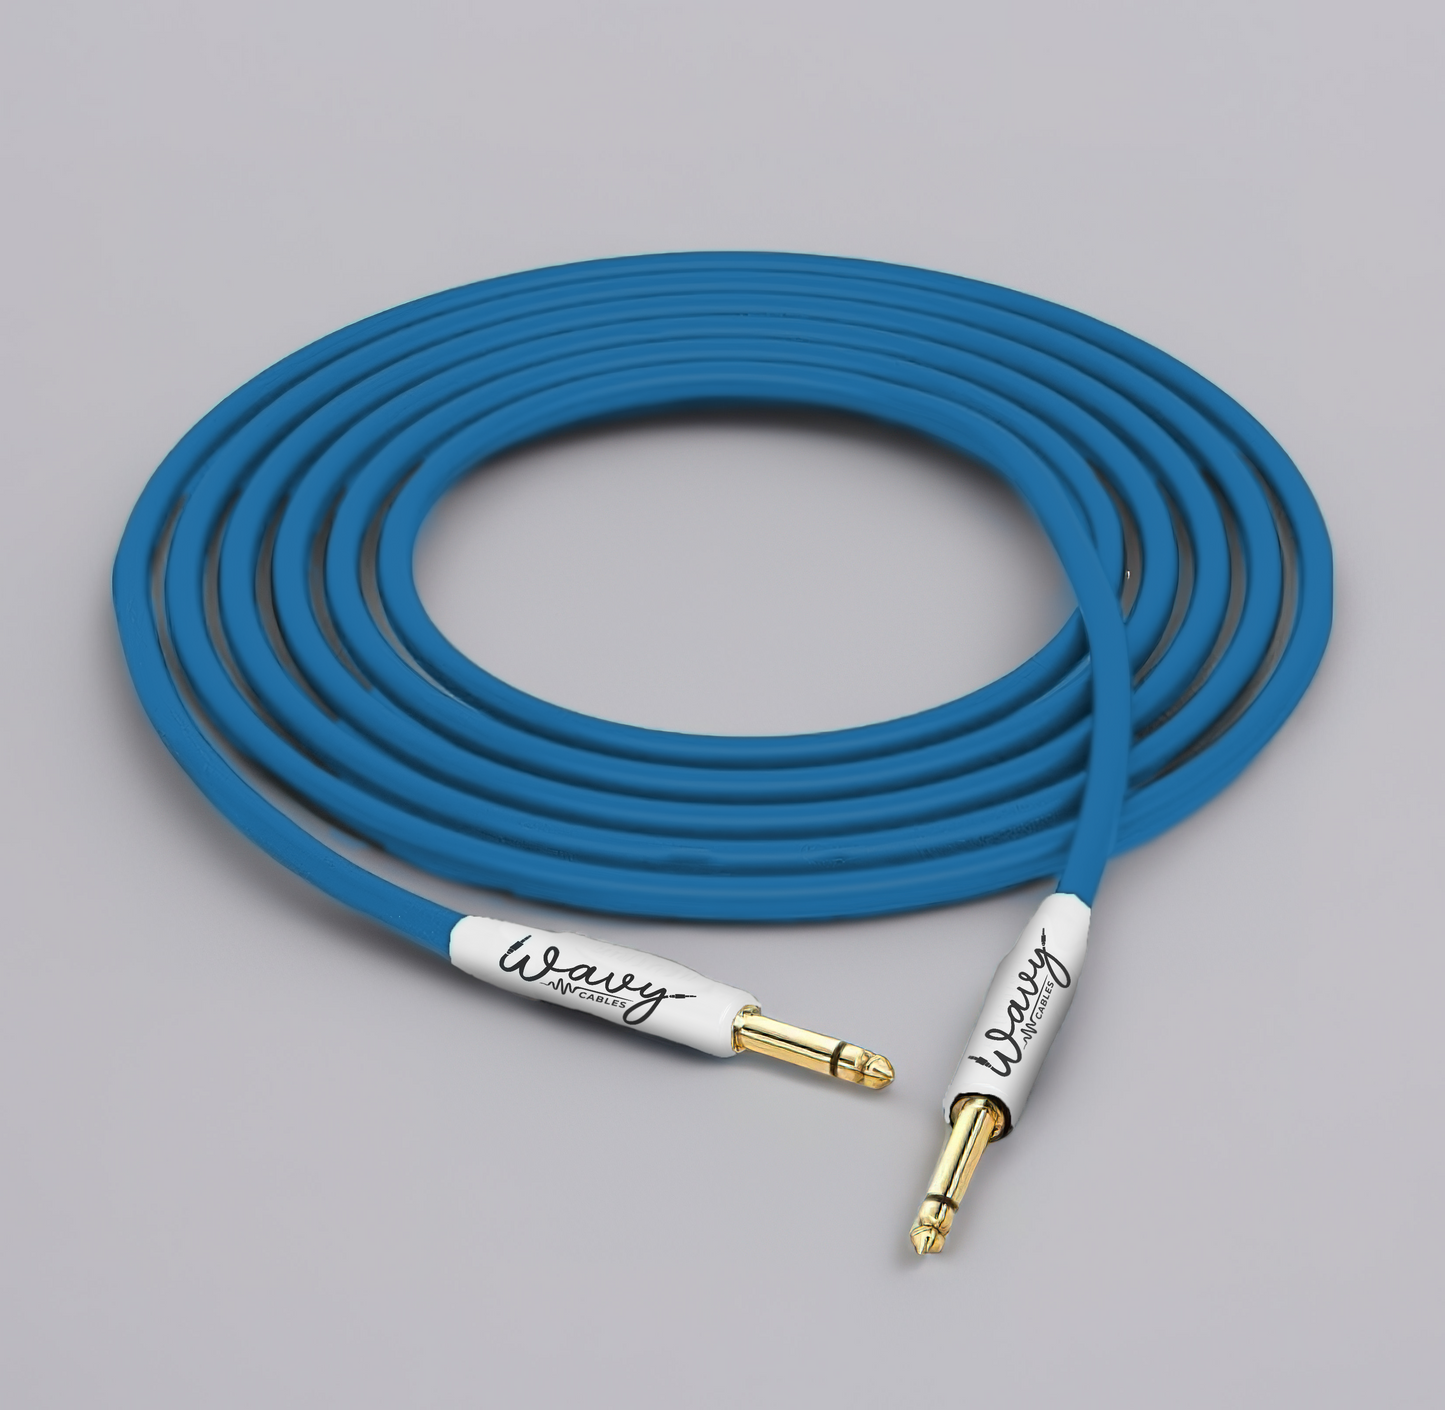 Straight to Straight / Instrument Cable (Blue)